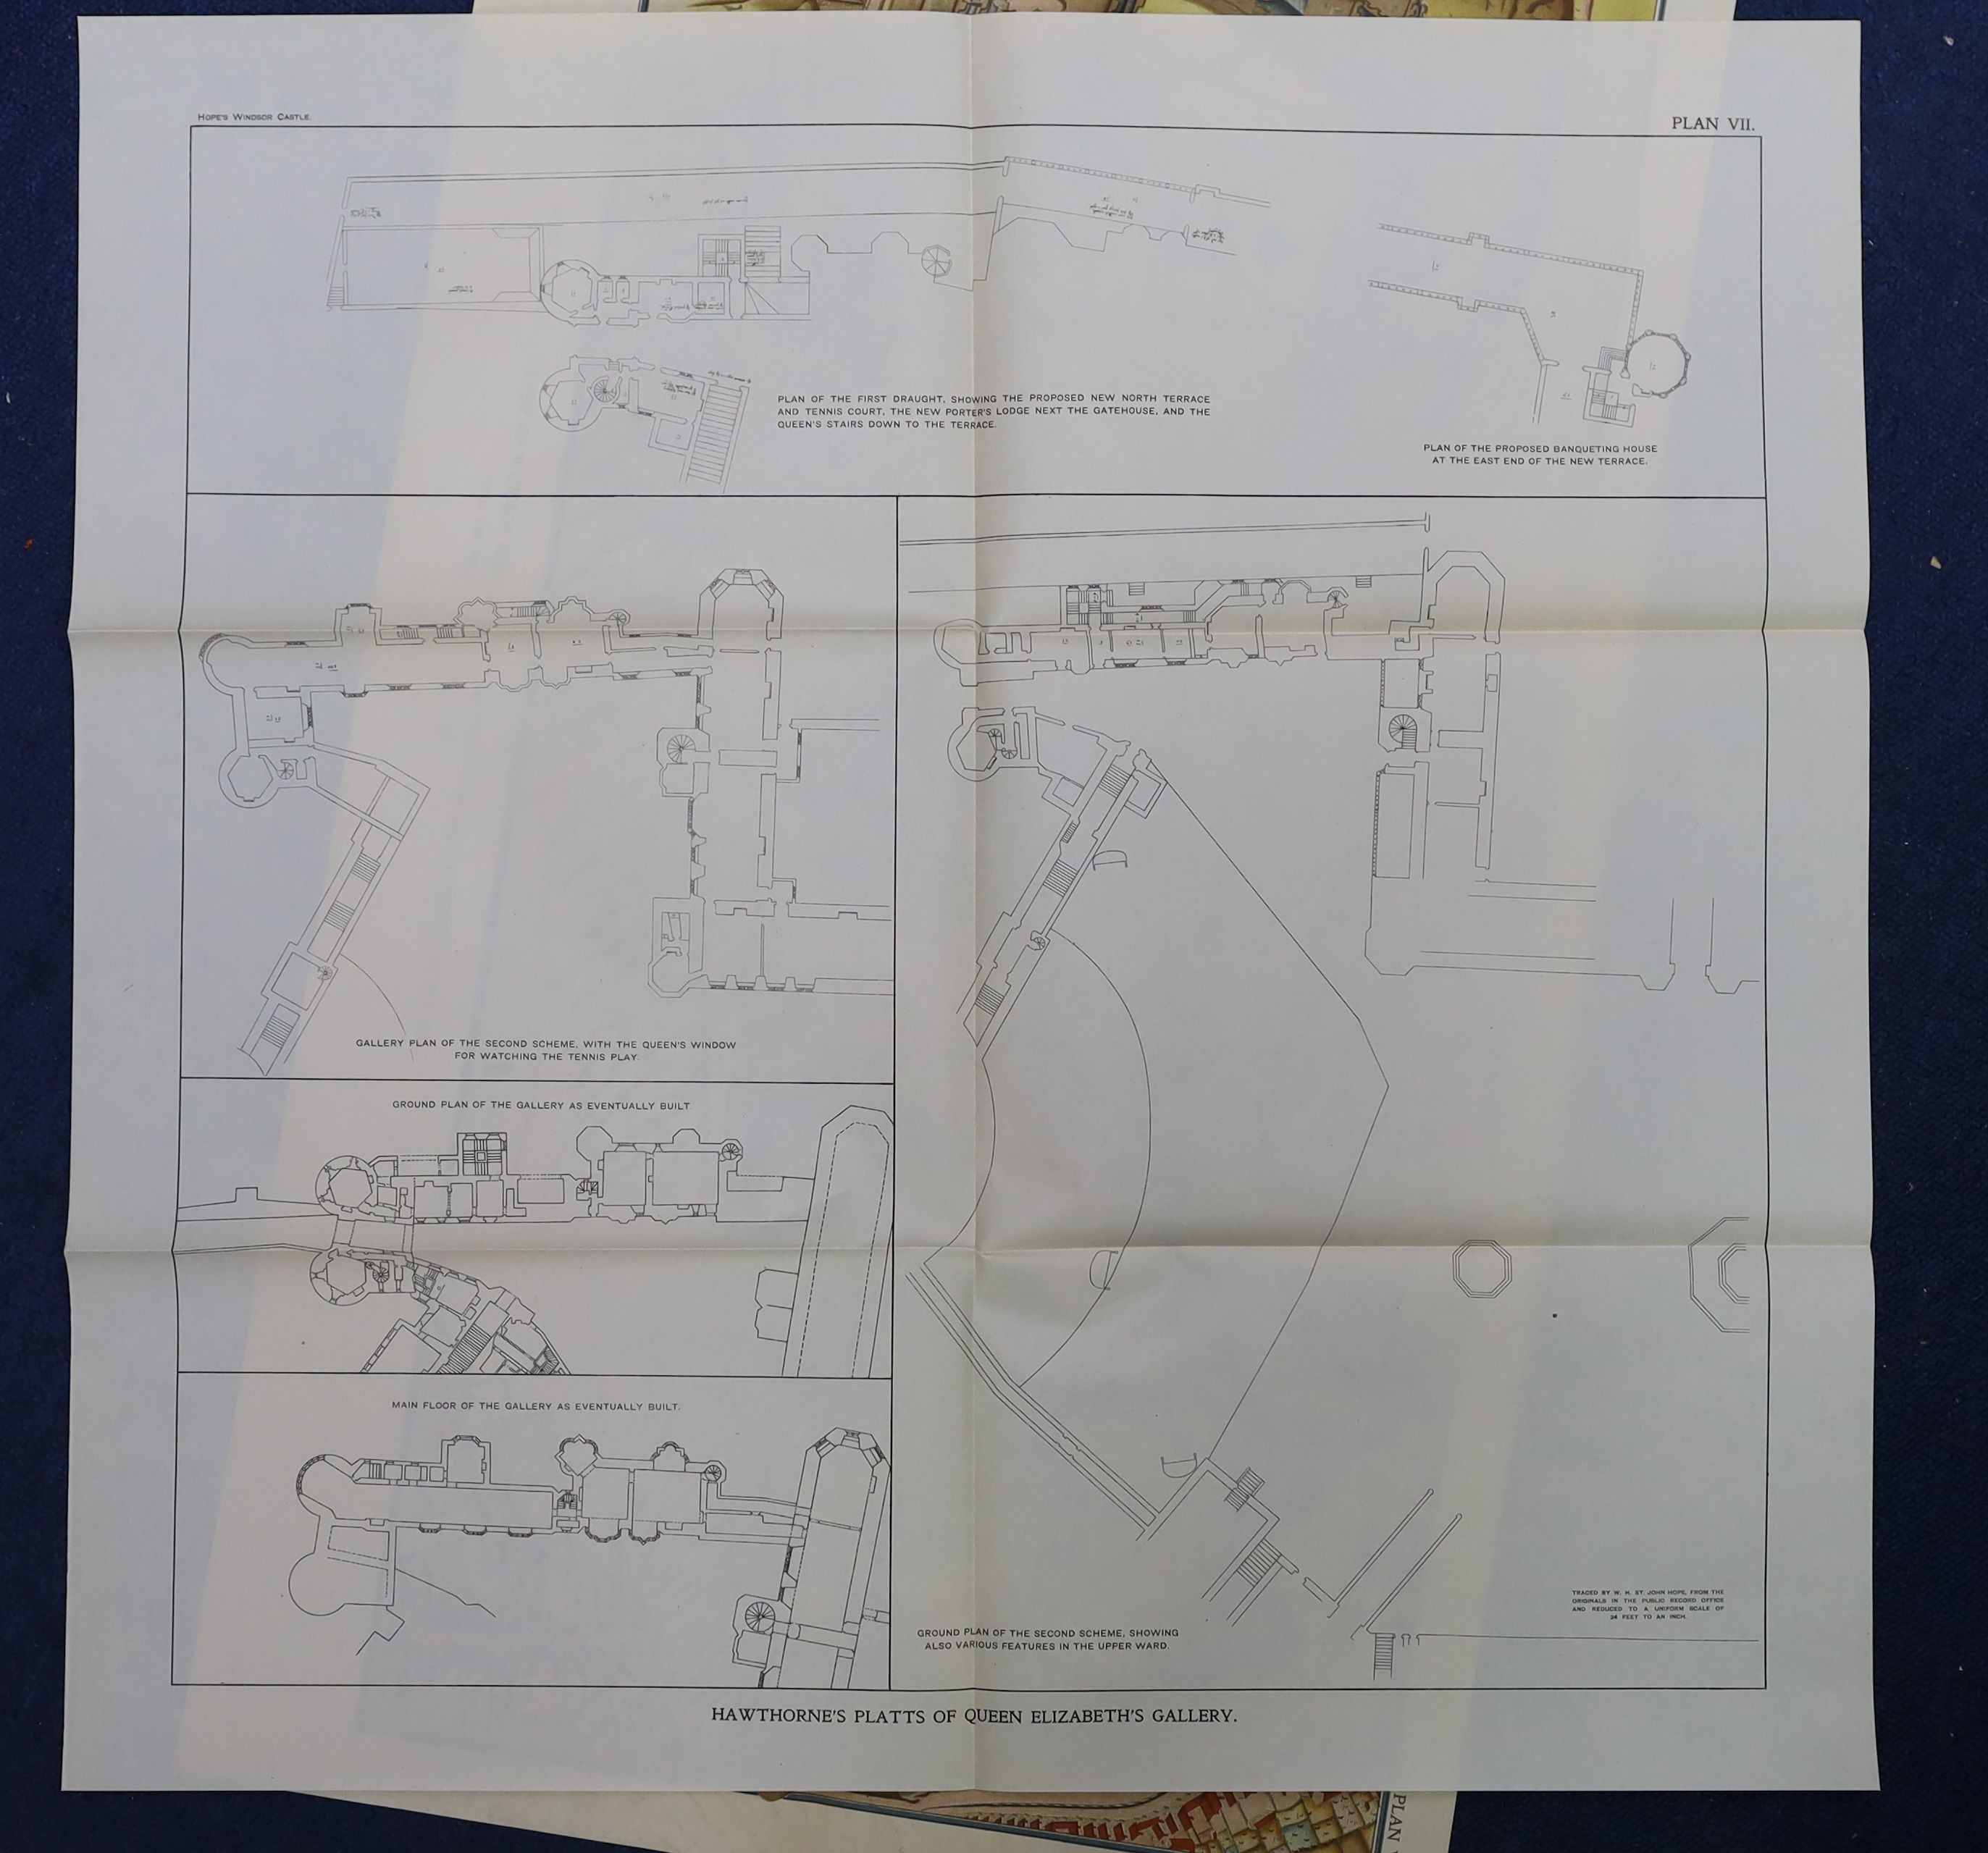 St.John, William Henry, Sir - The Plans of Windsor Castle, 8 folding plans, 72 x 79cms., in a portfolio, London, 1913 [To accompany the 3 volume work on Windsor Castle]